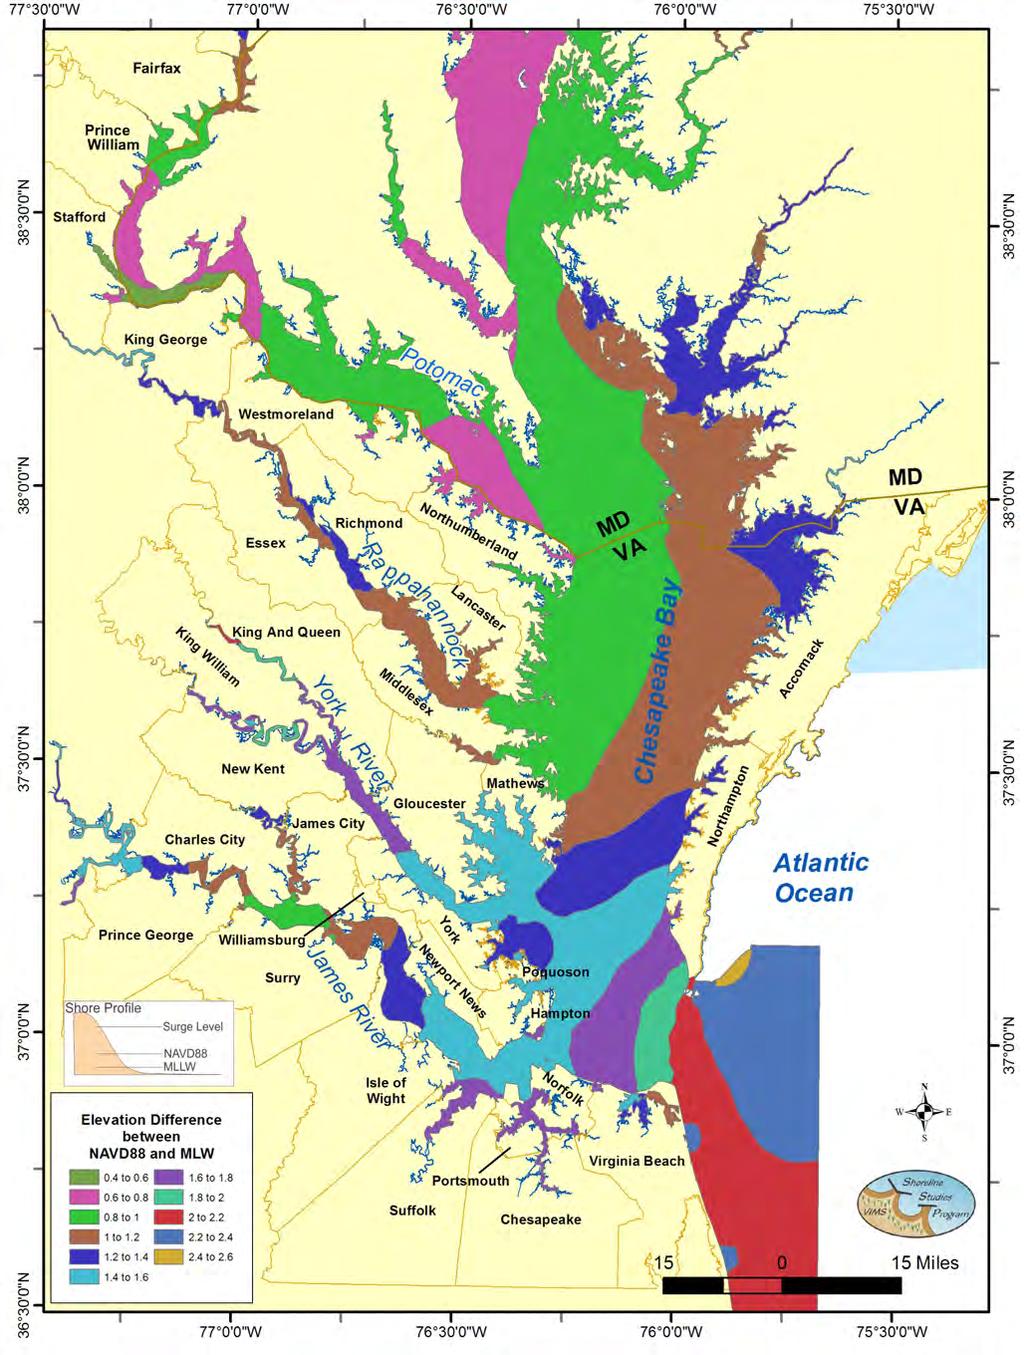 Figure 2-6. Map depicting the elevation difference between NAVD88 and MLLW in Chesapeake Bay. Data calculated using NOAA s VDATUM grids.